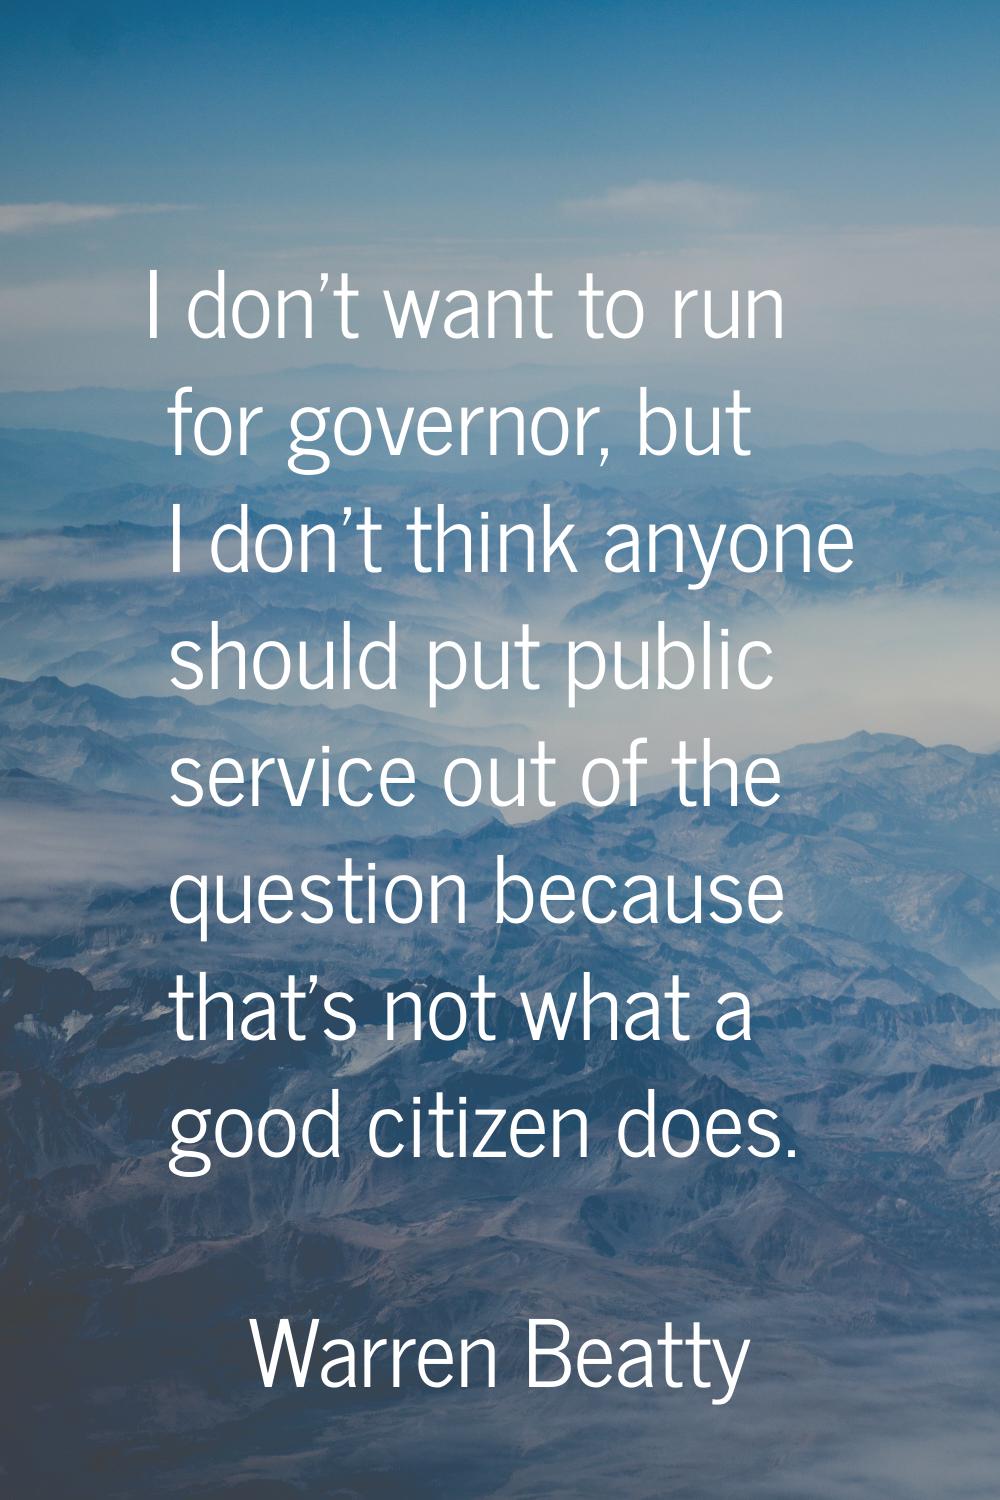 I don't want to run for governor, but I don't think anyone should put public service out of the que